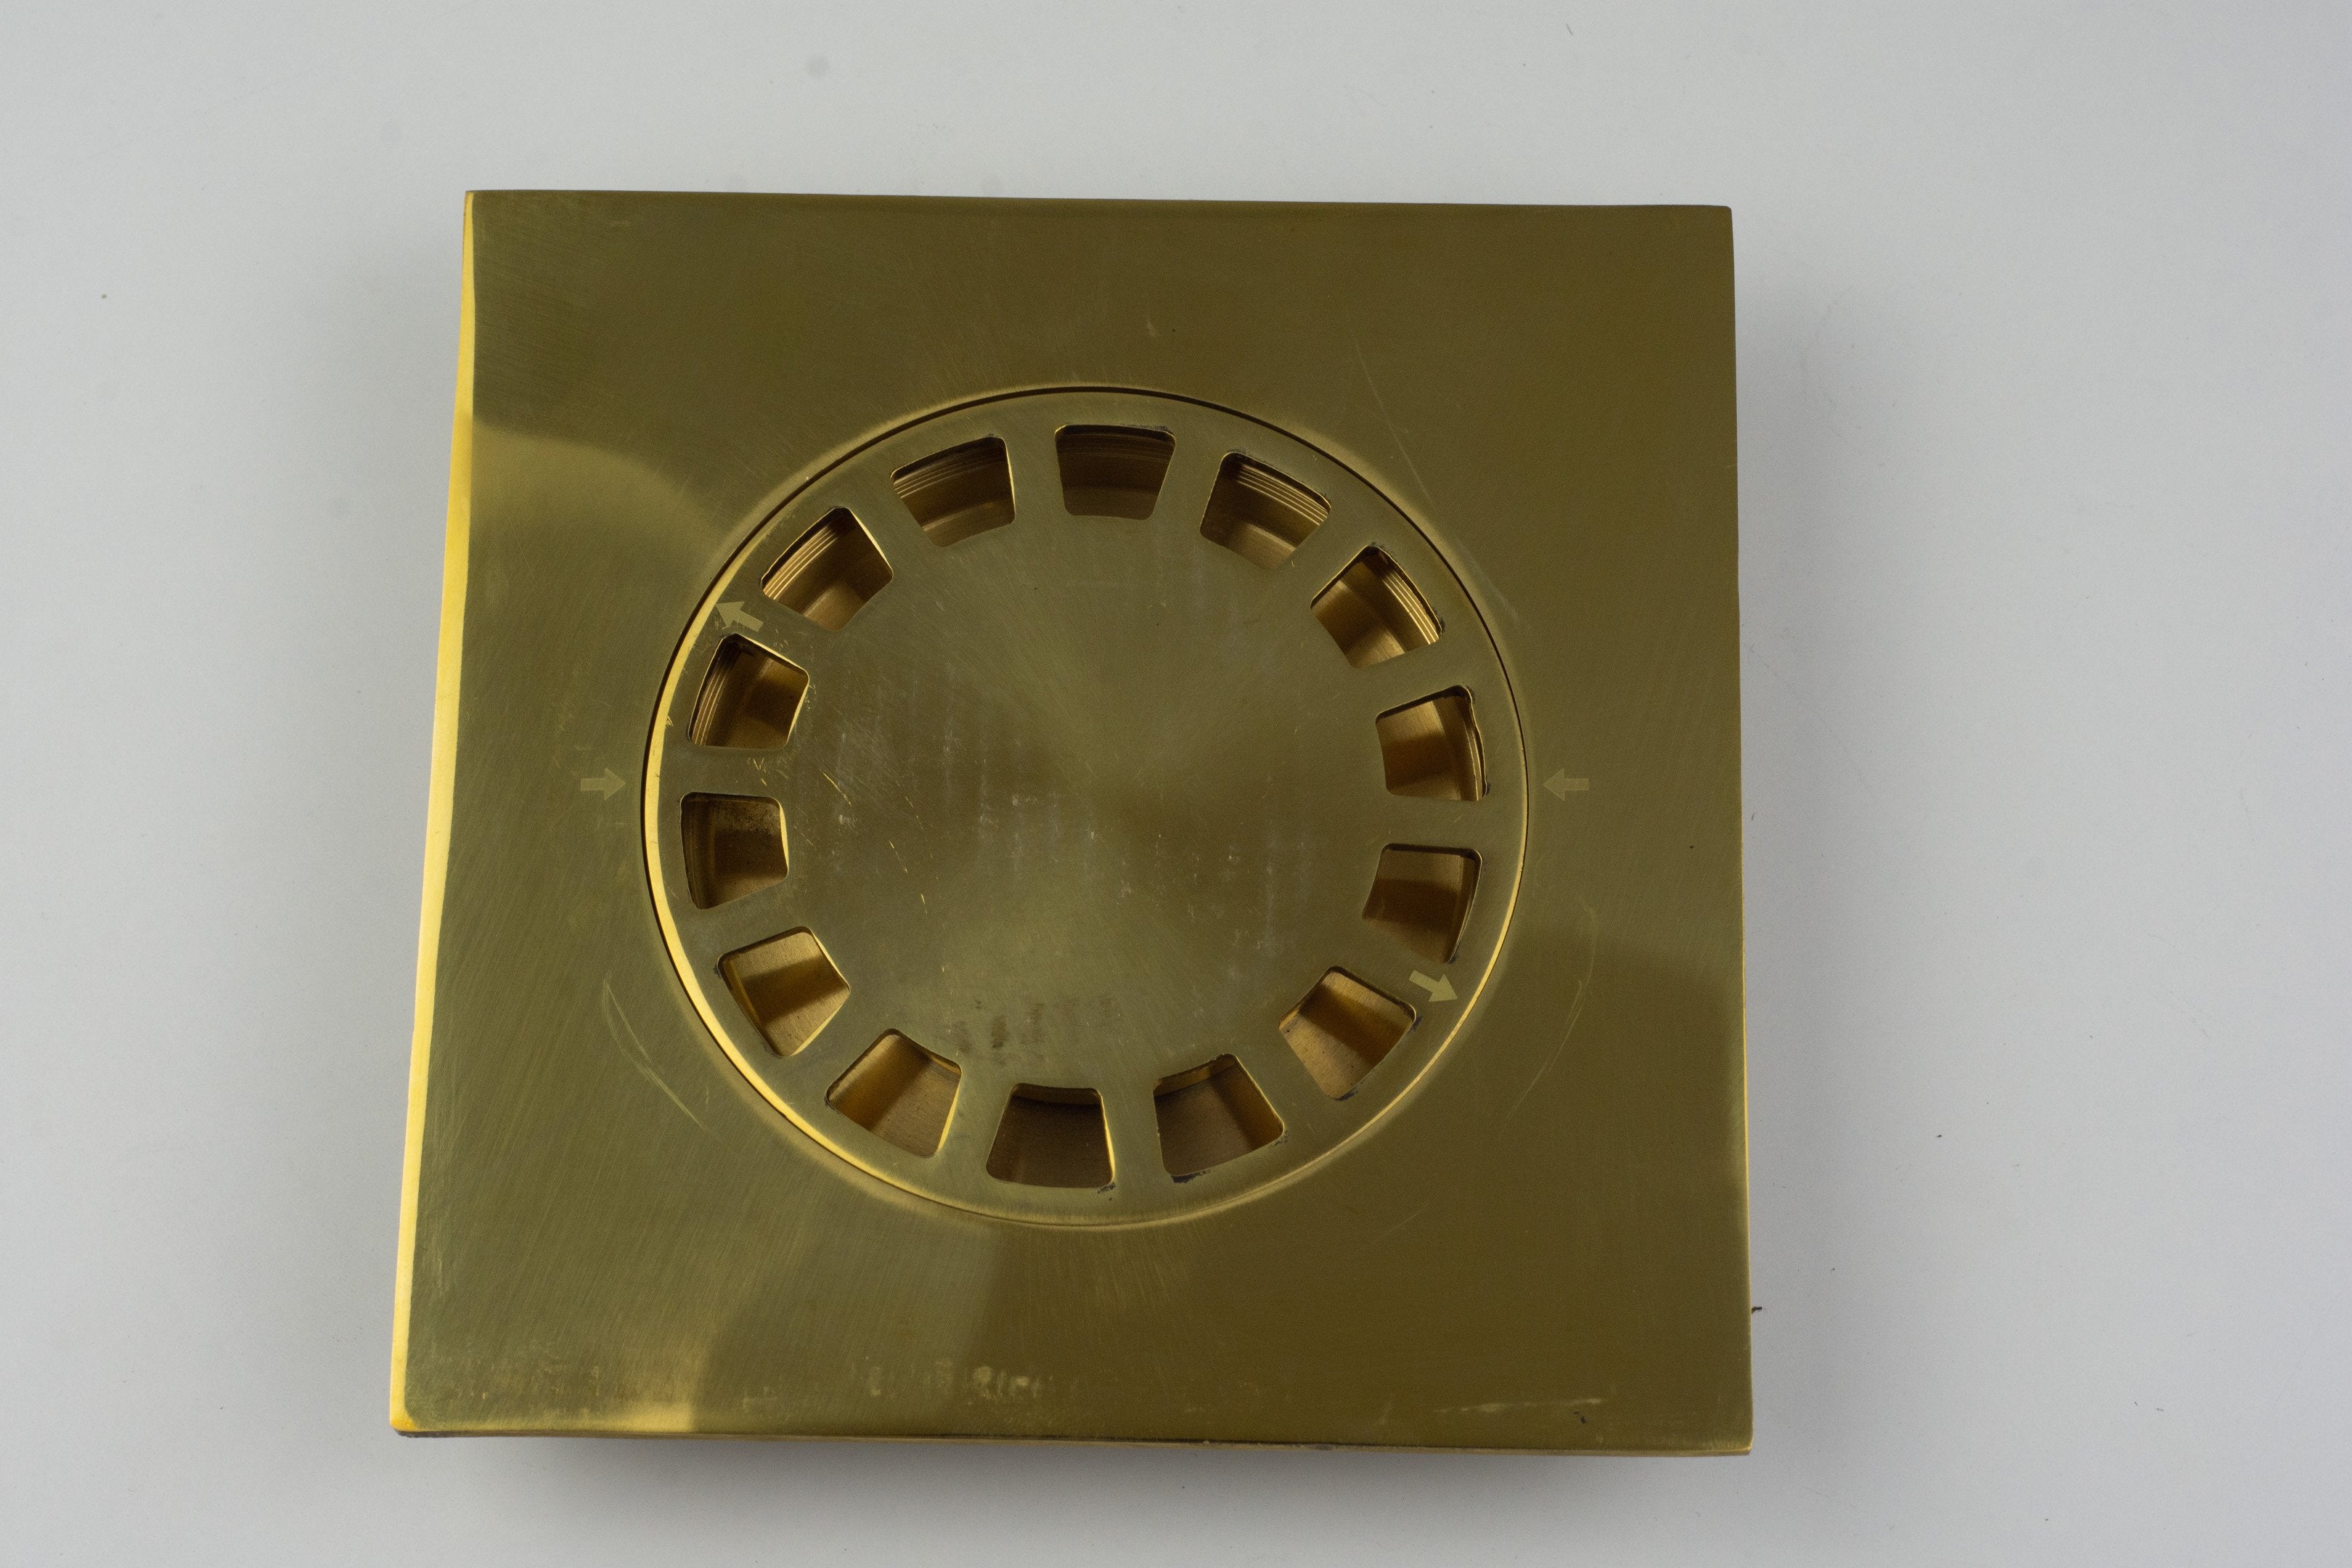 Solid Brass Floor Drain, Unlacquered Square Shower Drain